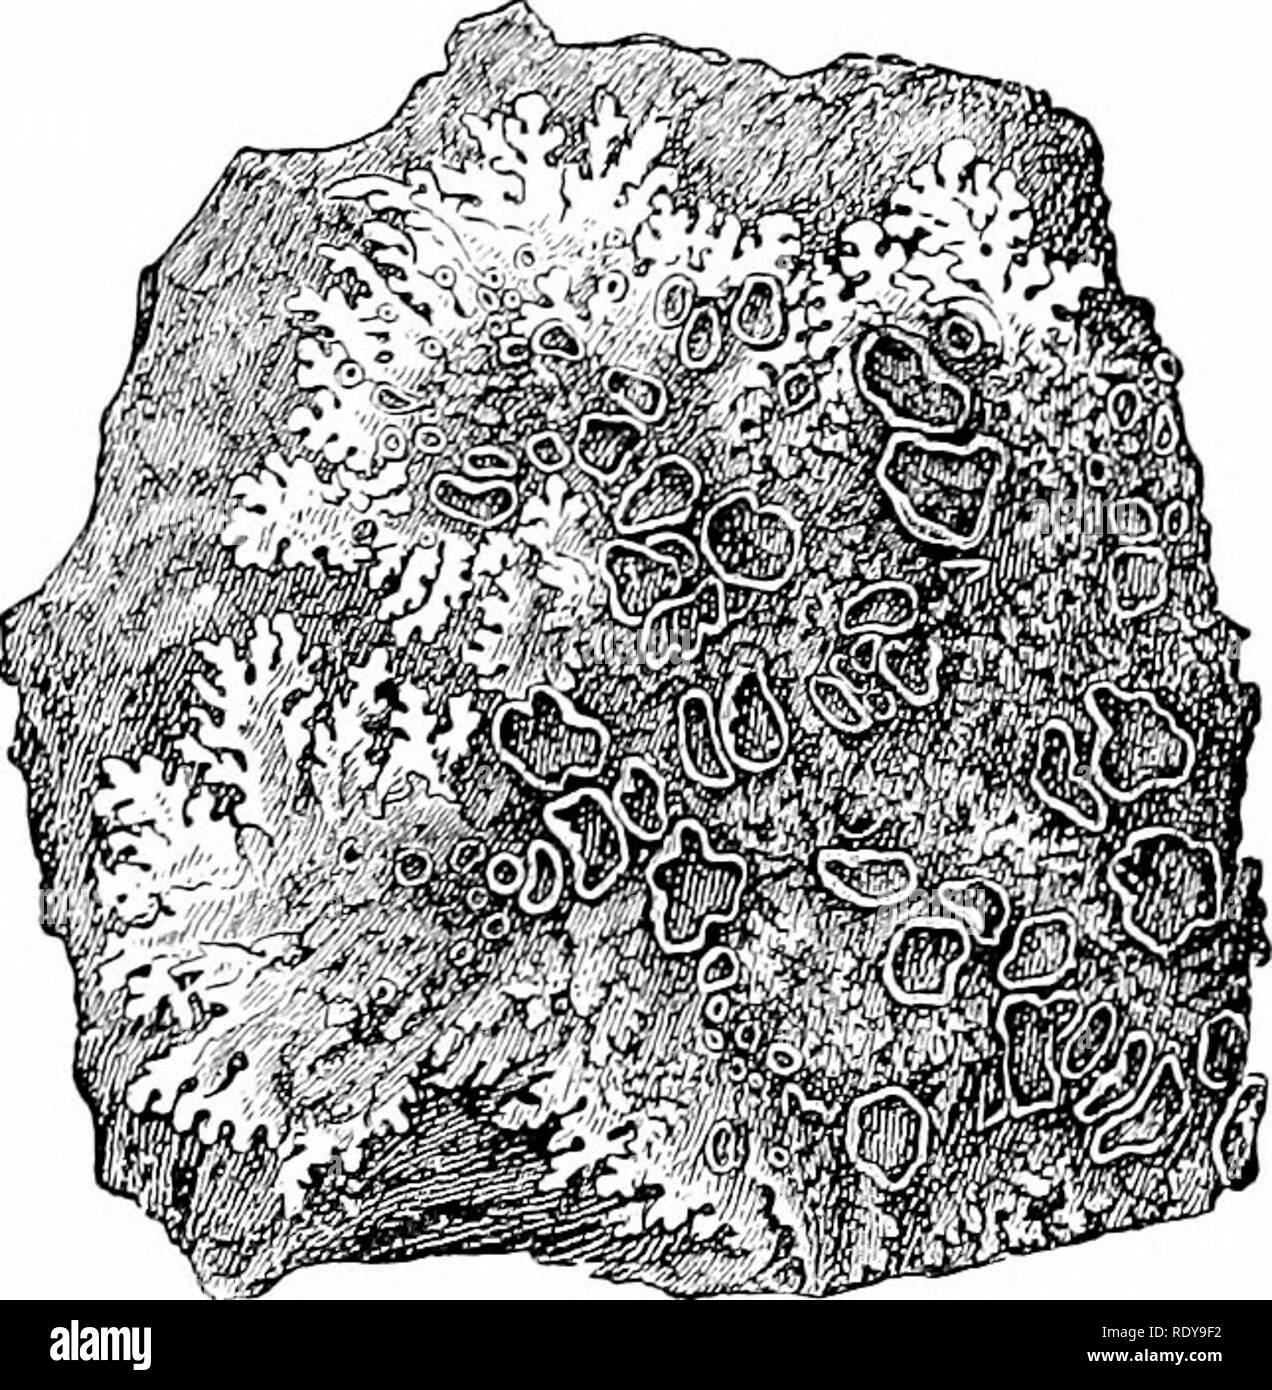 . Plant life, considered with special references to form and function. Plant physiology. VEGETATIVE REPRODUCTION. 225 as homologous with a hair. Sometimes the sporangia, although really free, are overgrown by adjacent parts, so that. Fig. 225.—A lichen {P.innelia conspersa) growing on a sti.»ne, showing the leaf-Uke thallus (mycelium*, witli many fructifications lapothecia'. Tlie older ones are more or less in'egular and large with a narrow rim ; the younger are nearer the margin, cir- cular, and nearly closed over at top. Natural size.—After Frank.. Please note that these images are extracted Stock Photo